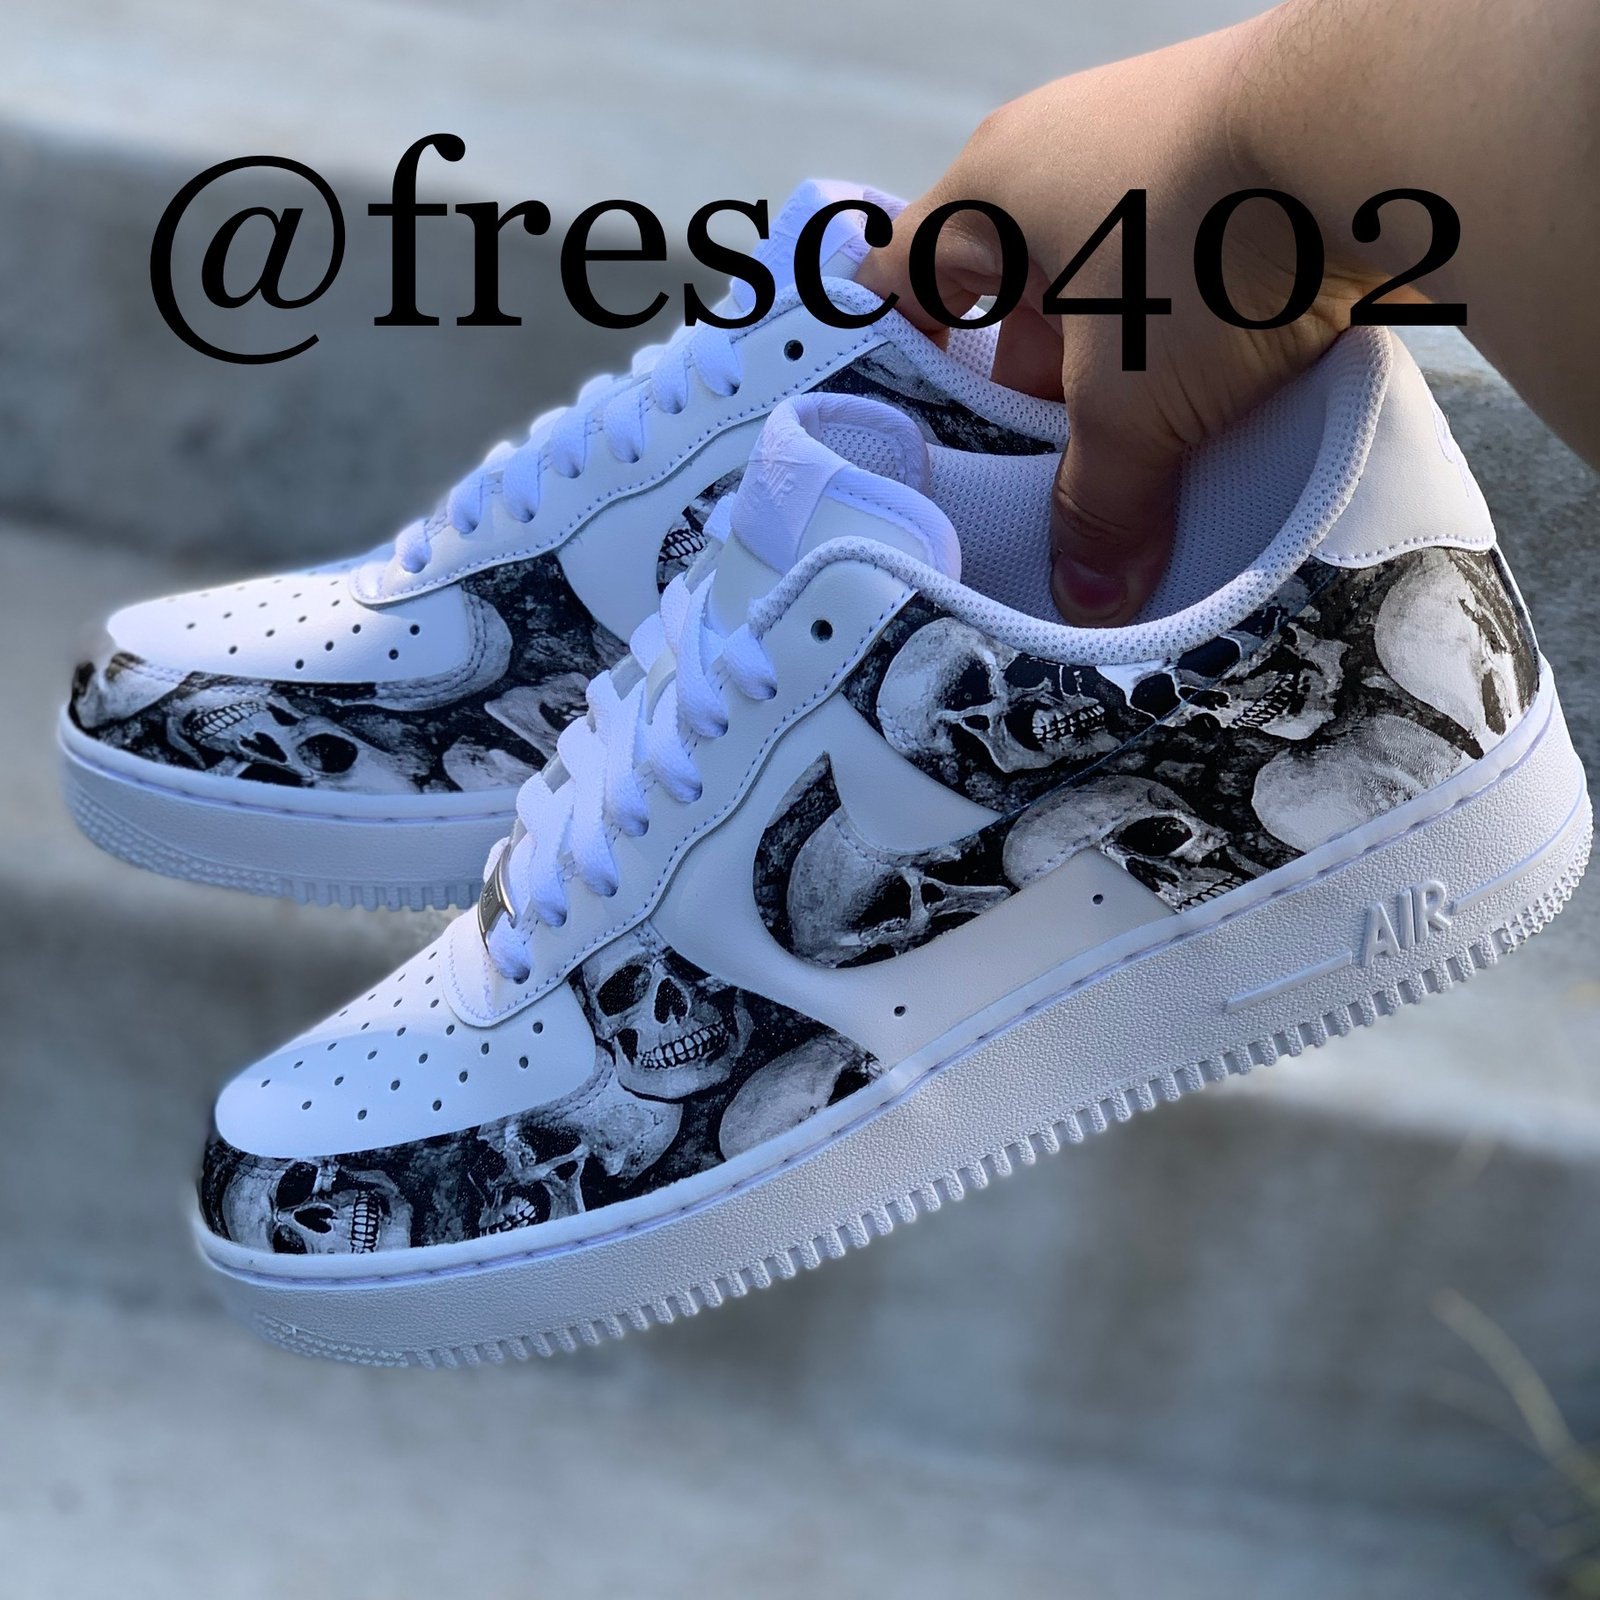 hydro dipped af1s